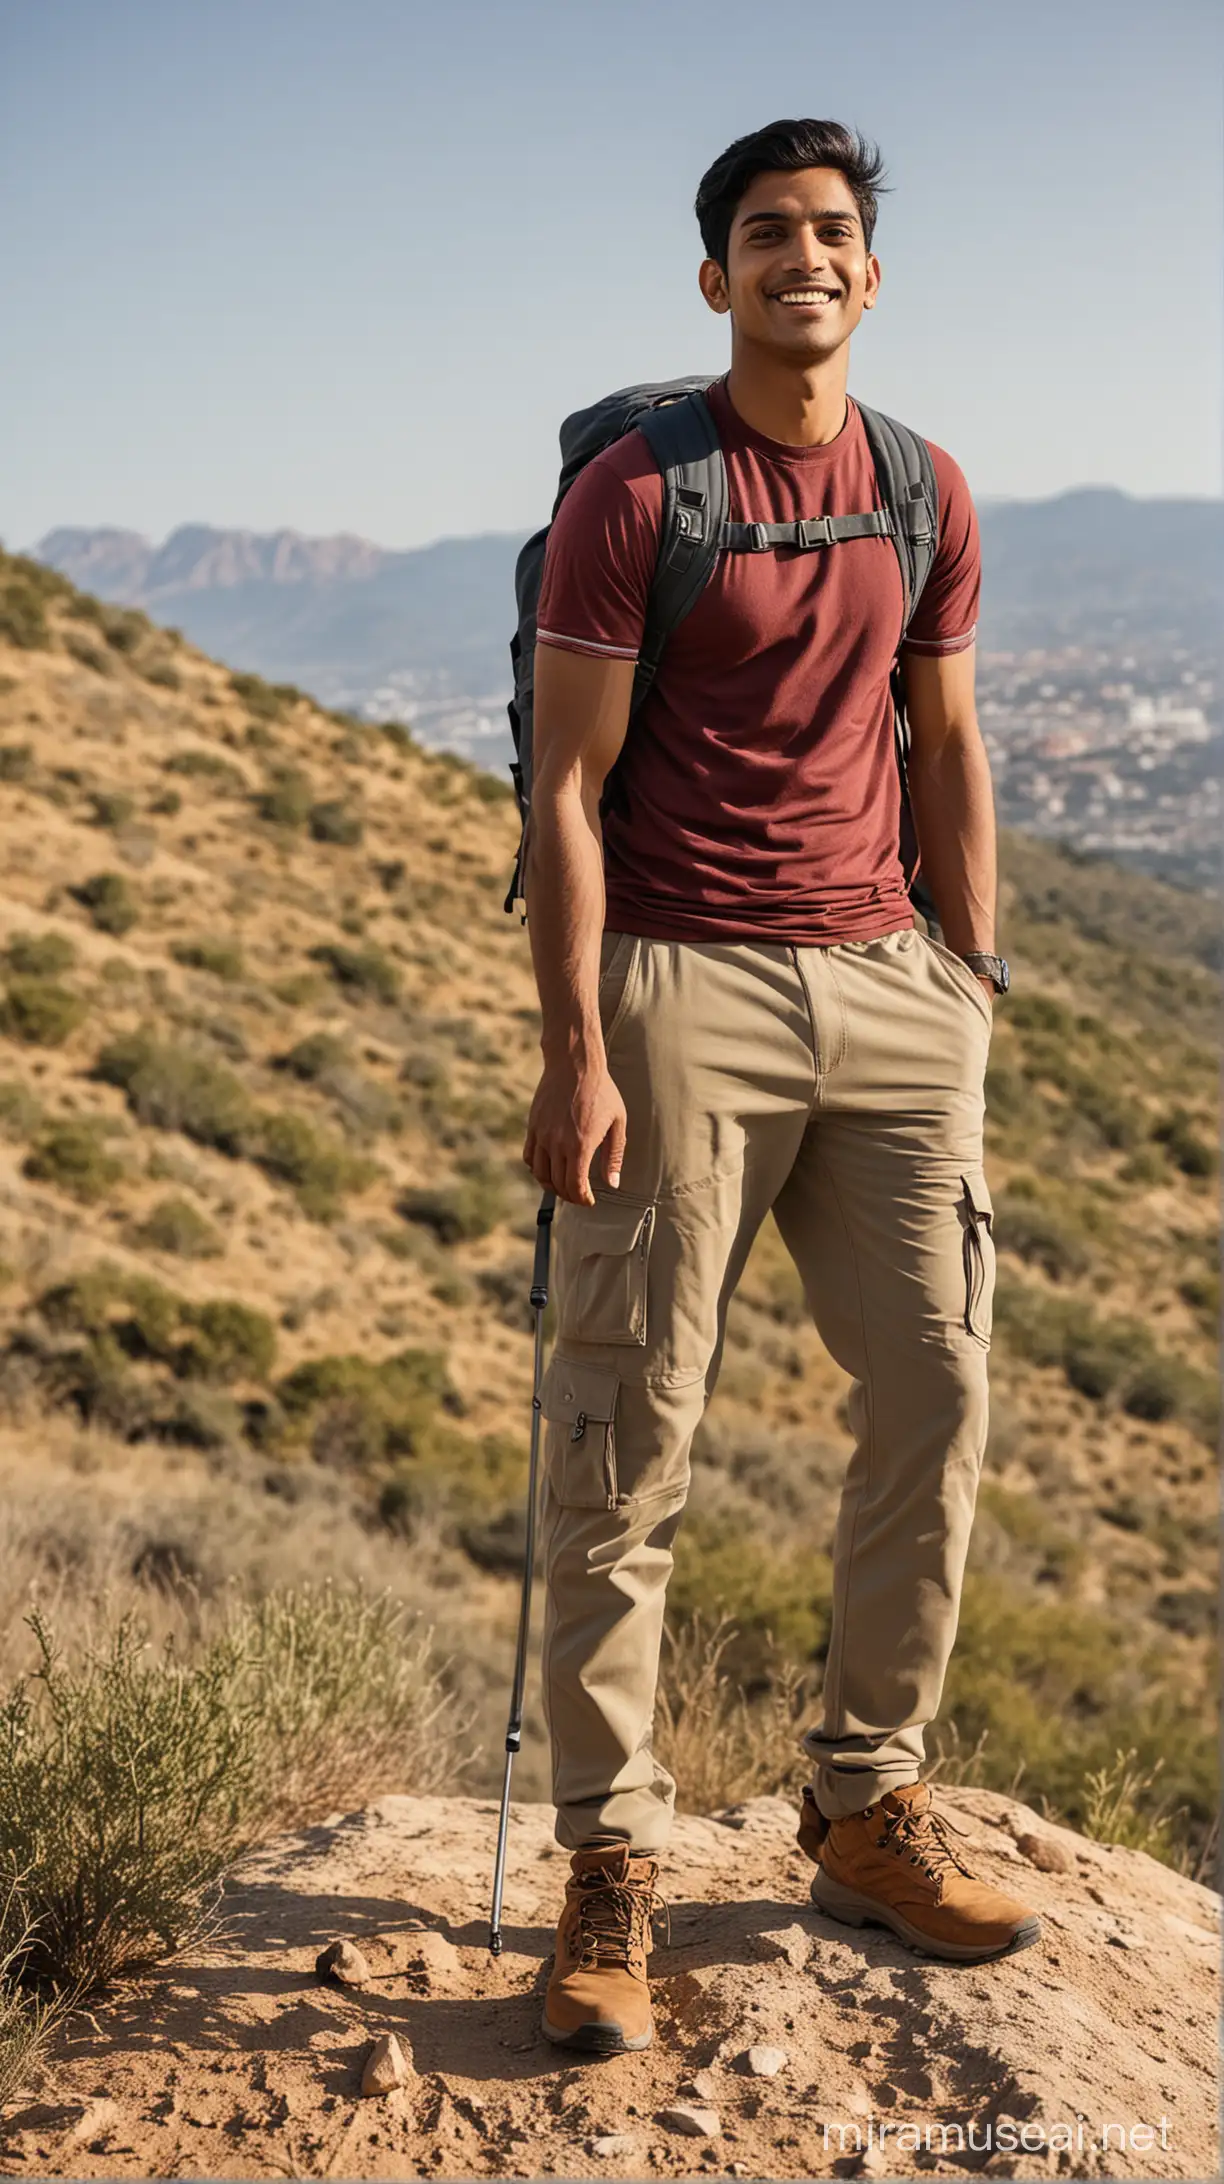 Young Indian man in 20s full body in hiking outfit on hill
